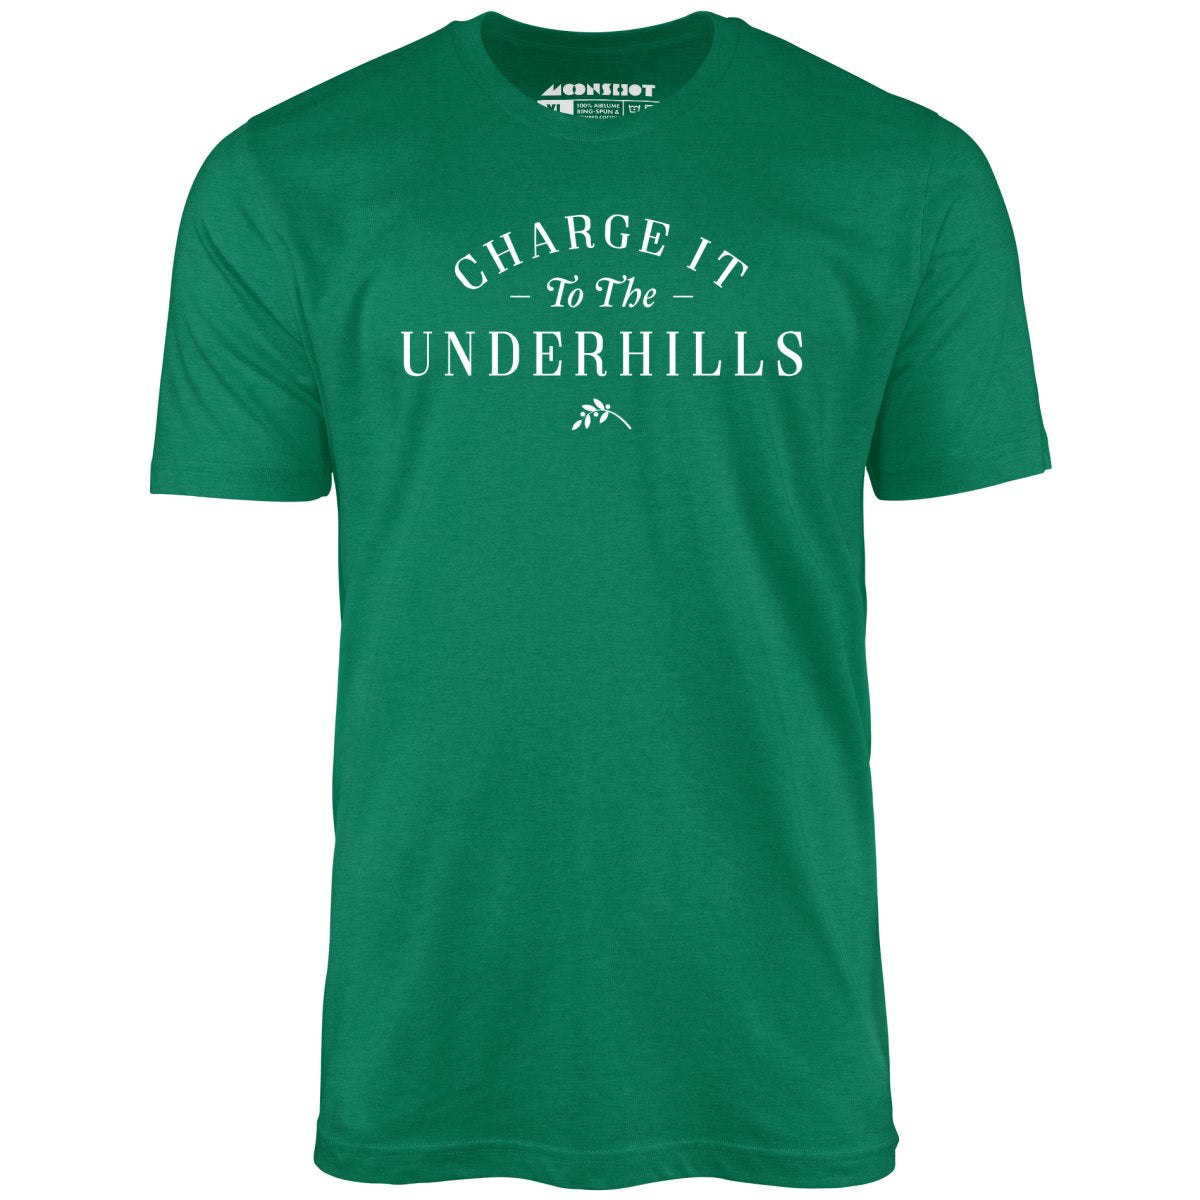 Charge it to the Underhills - Unisex T-Shirt